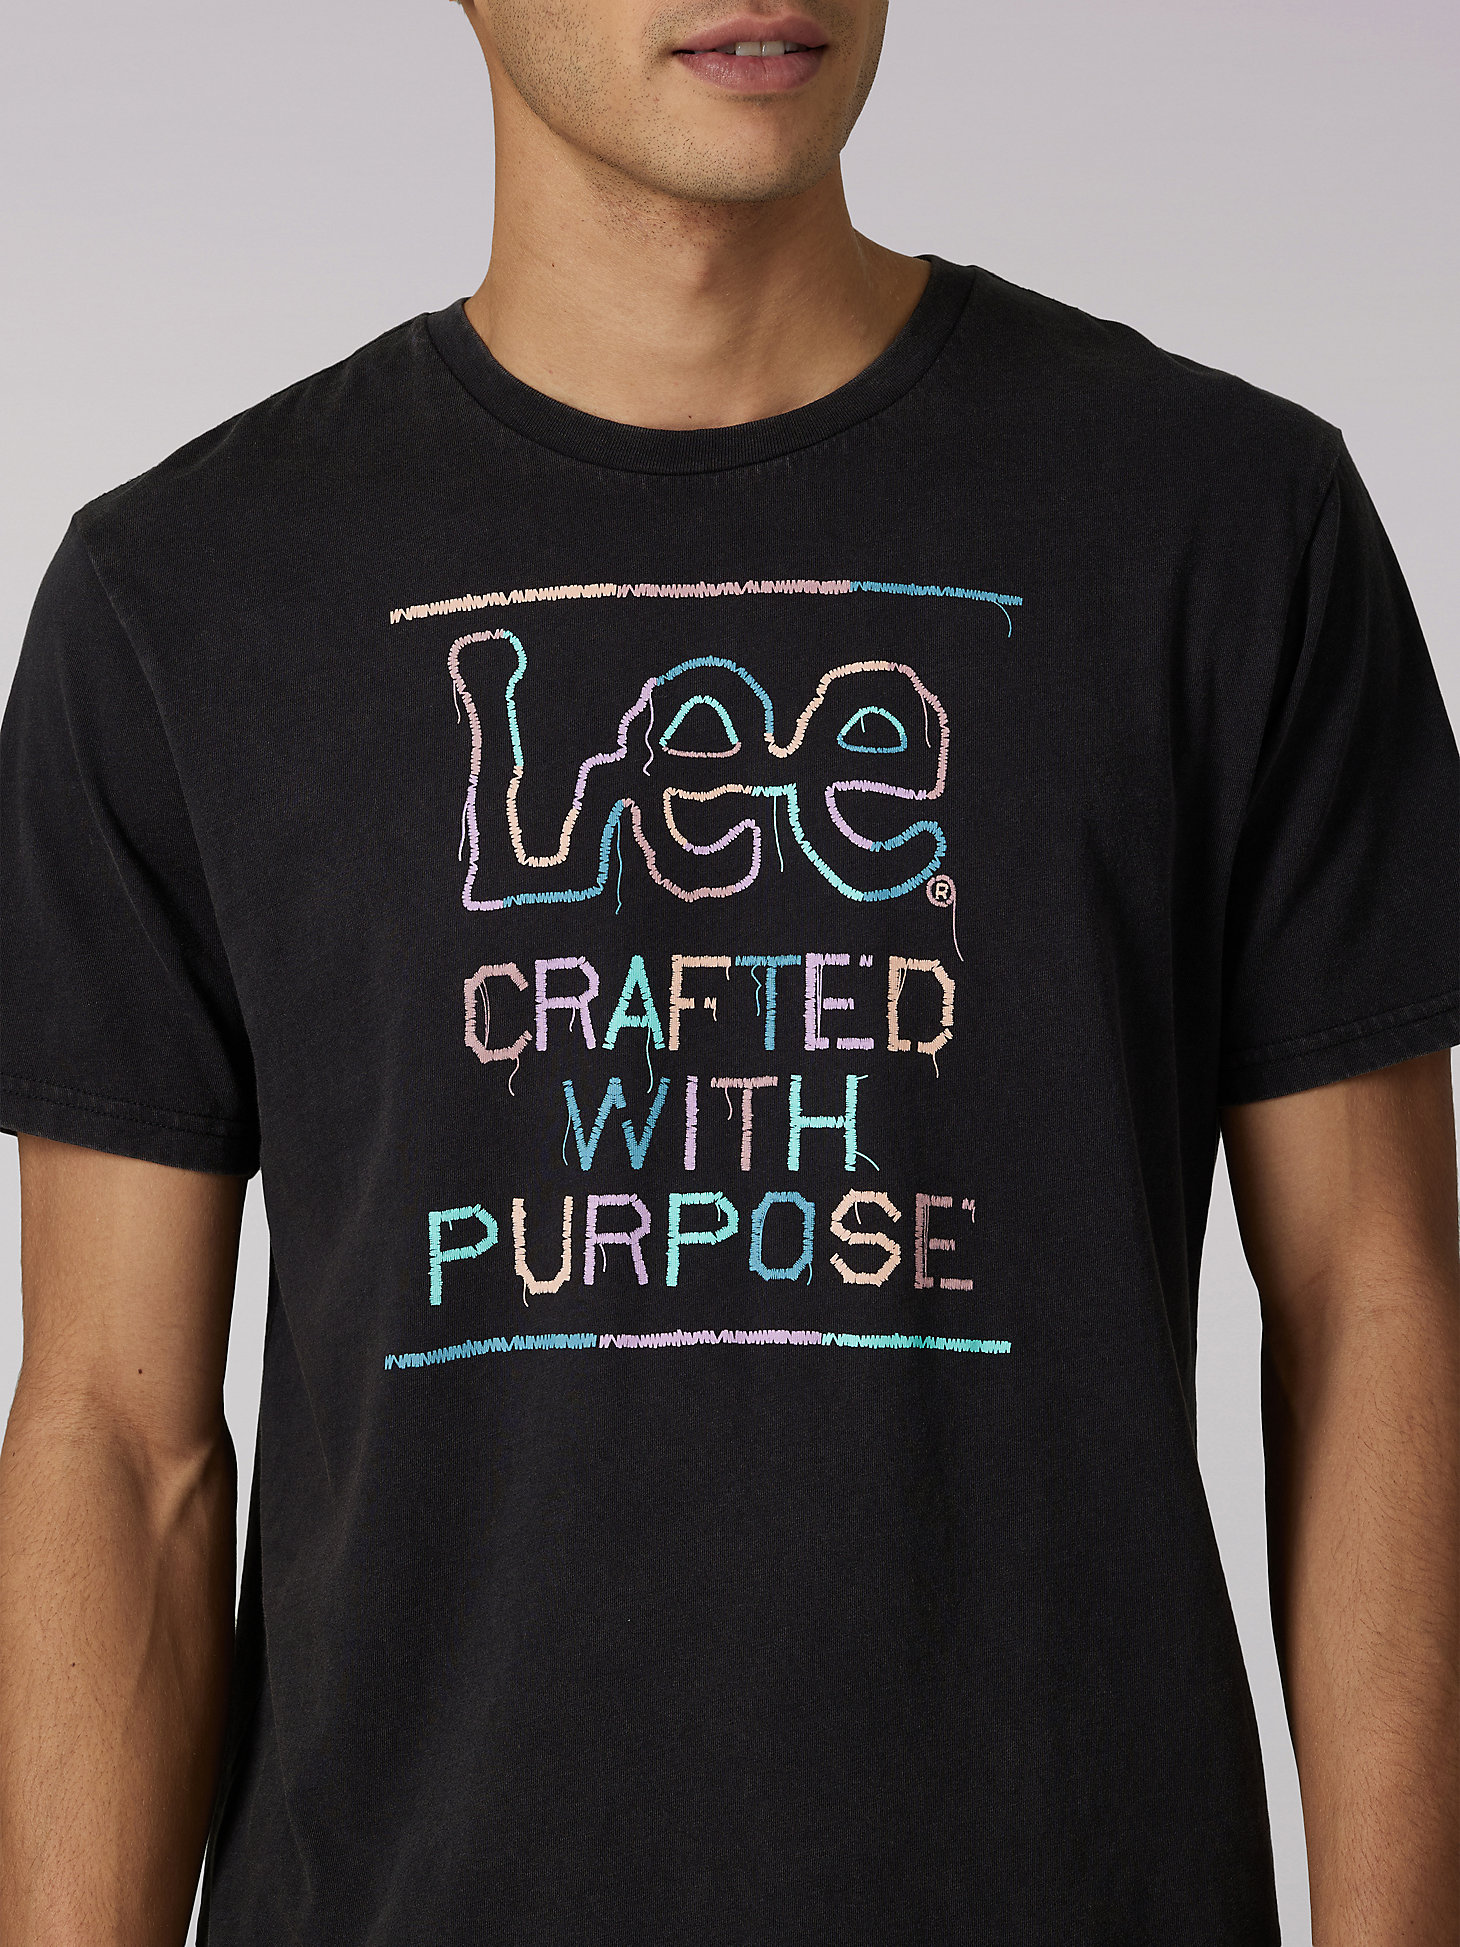 Men's Heritage Lee Crafted With Purpose Tee in Washed Black alternative view 2